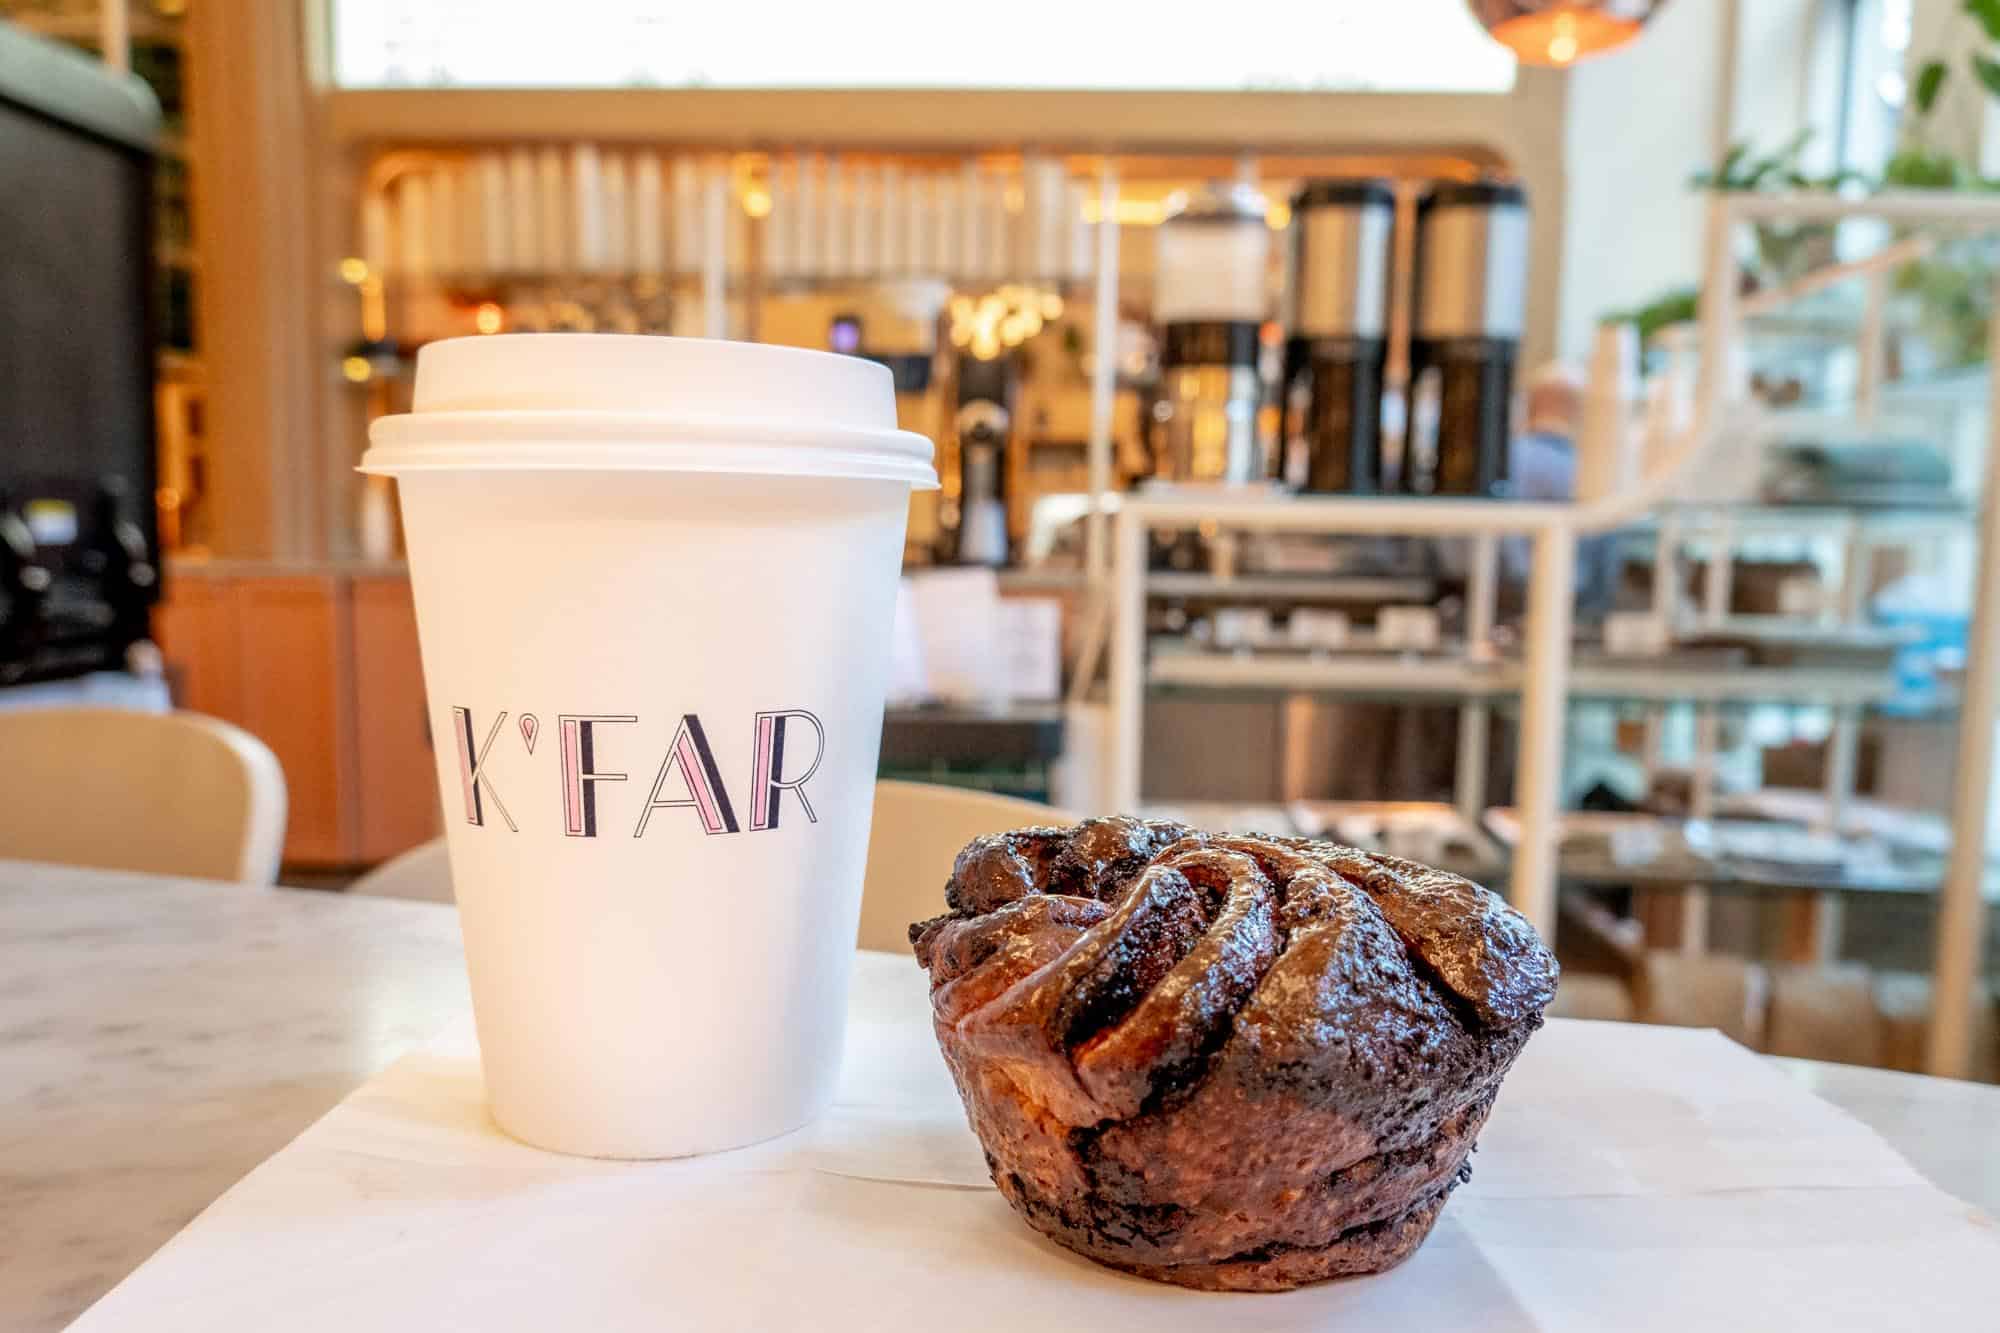 Coffee cup labeled "K'Far" and pastry on the counter in a cafe